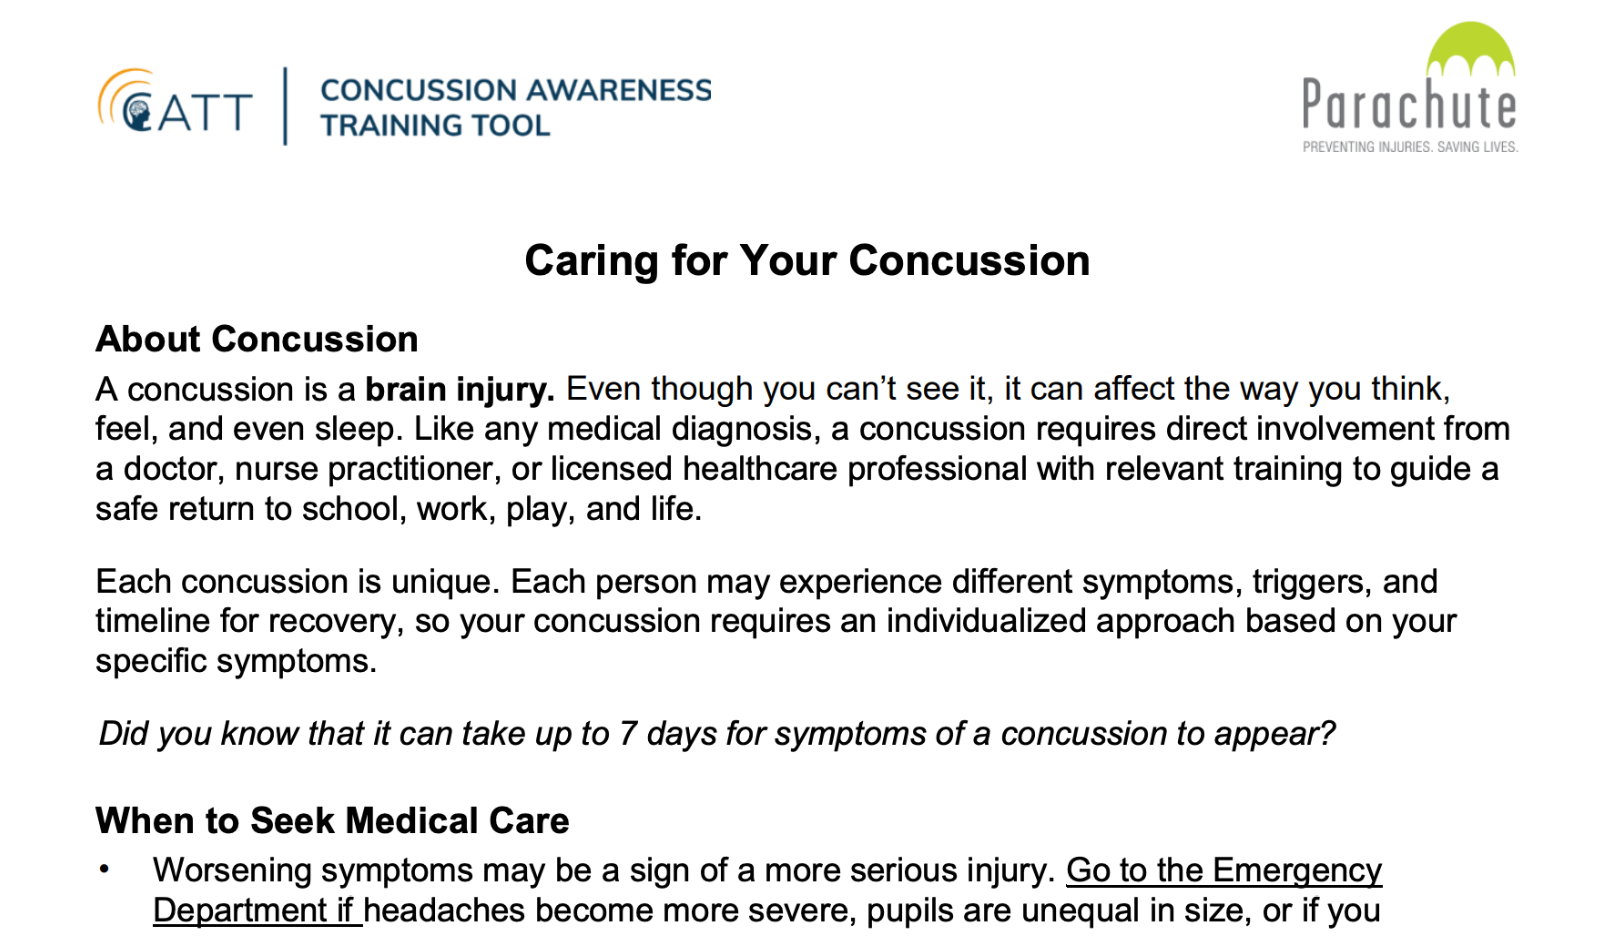 Caring for Your Concussion